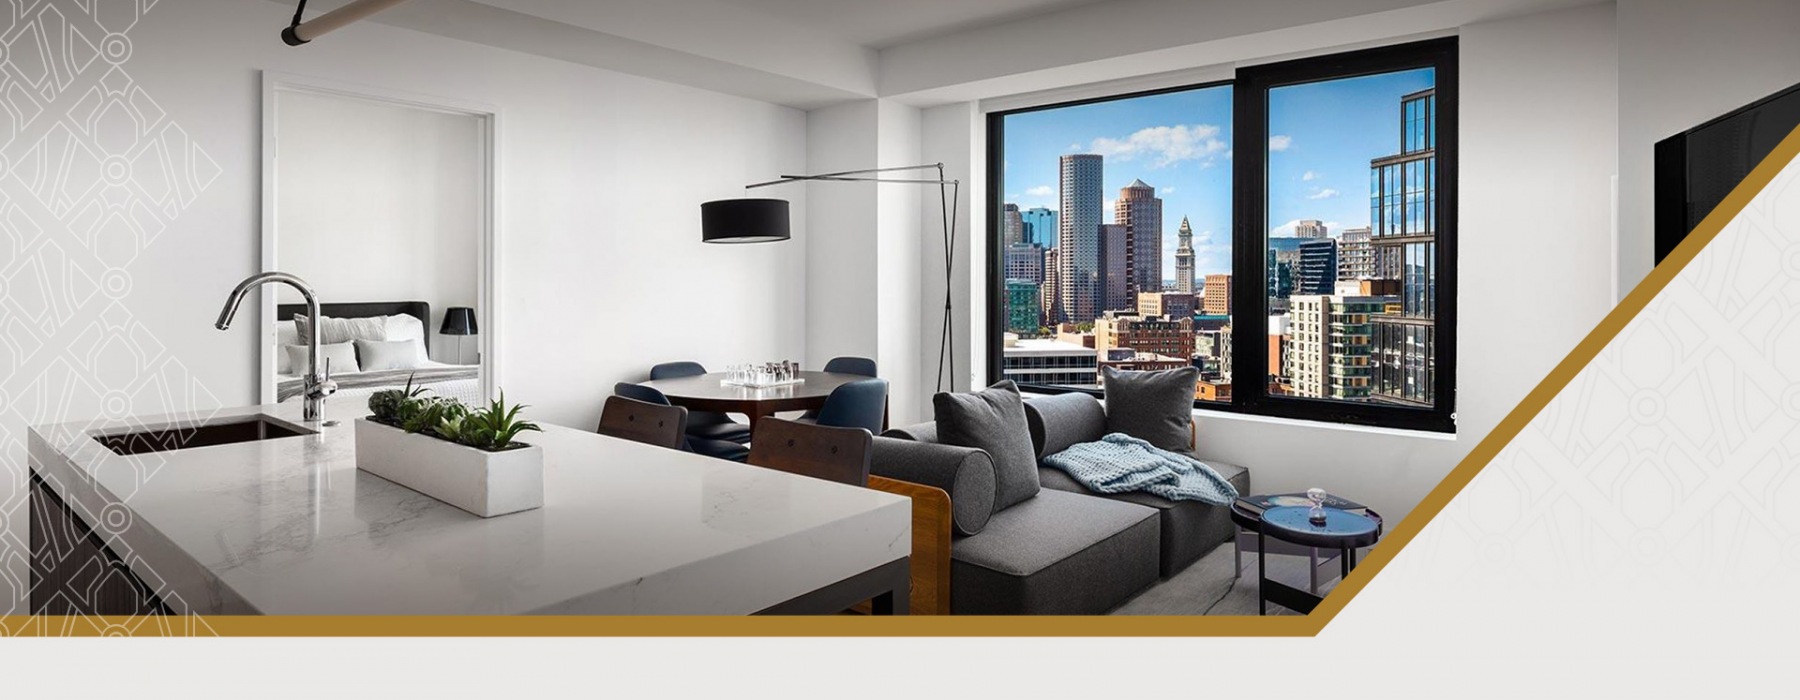 the-metlo-seaport-boston-apartments-page-for-residents